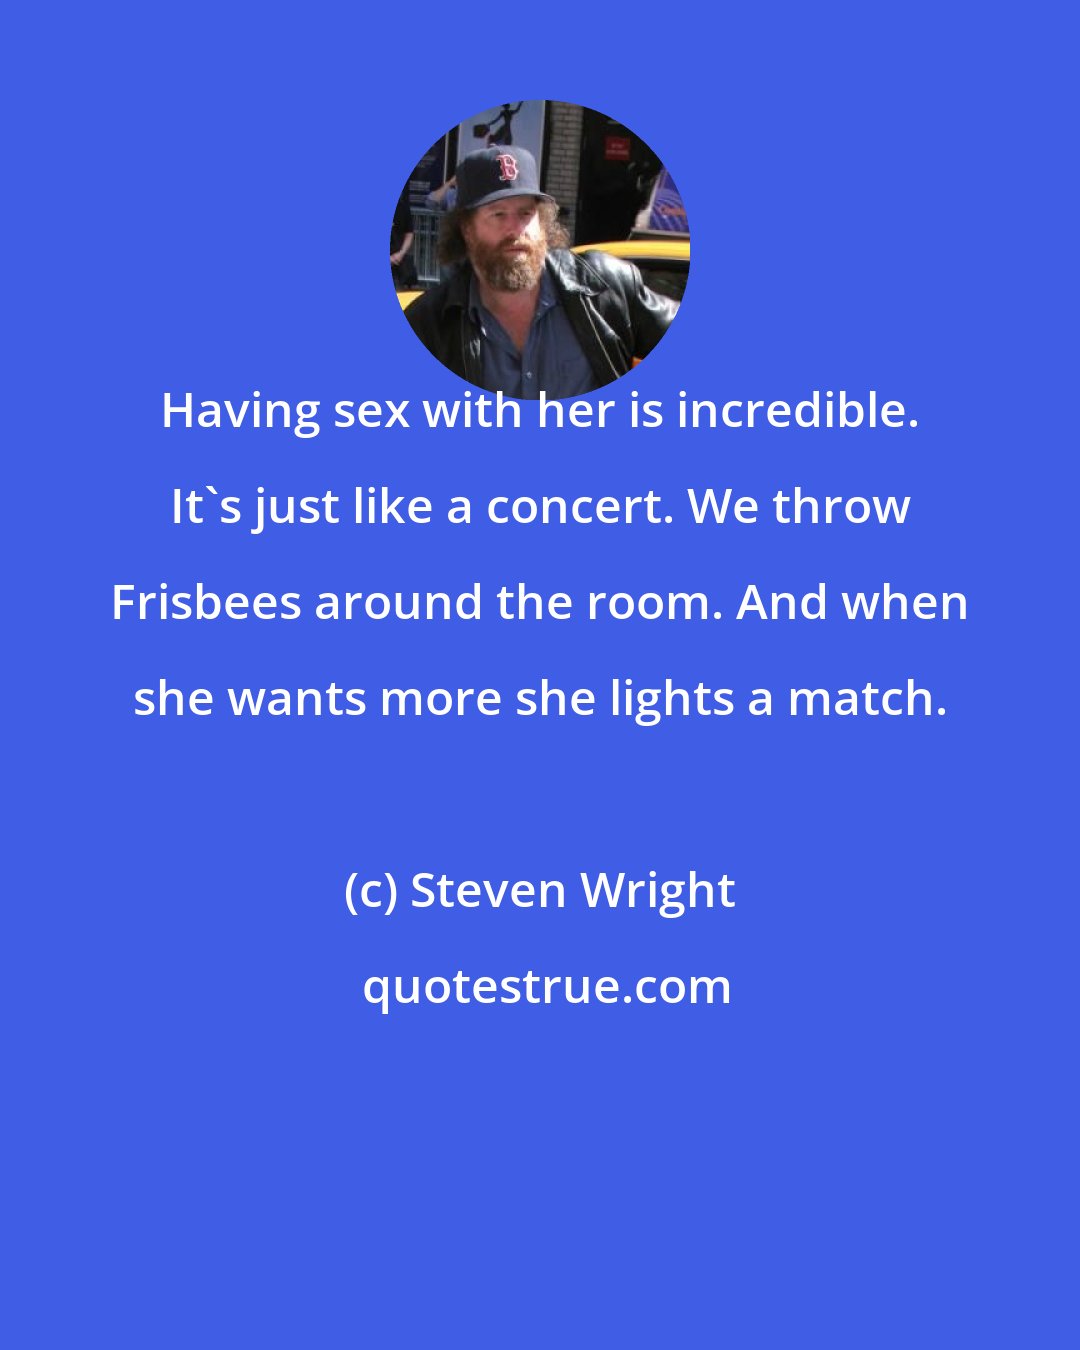 Steven Wright: Having sex with her is incredible. It's just like a concert. We throw Frisbees around the room. And when she wants more she lights a match.